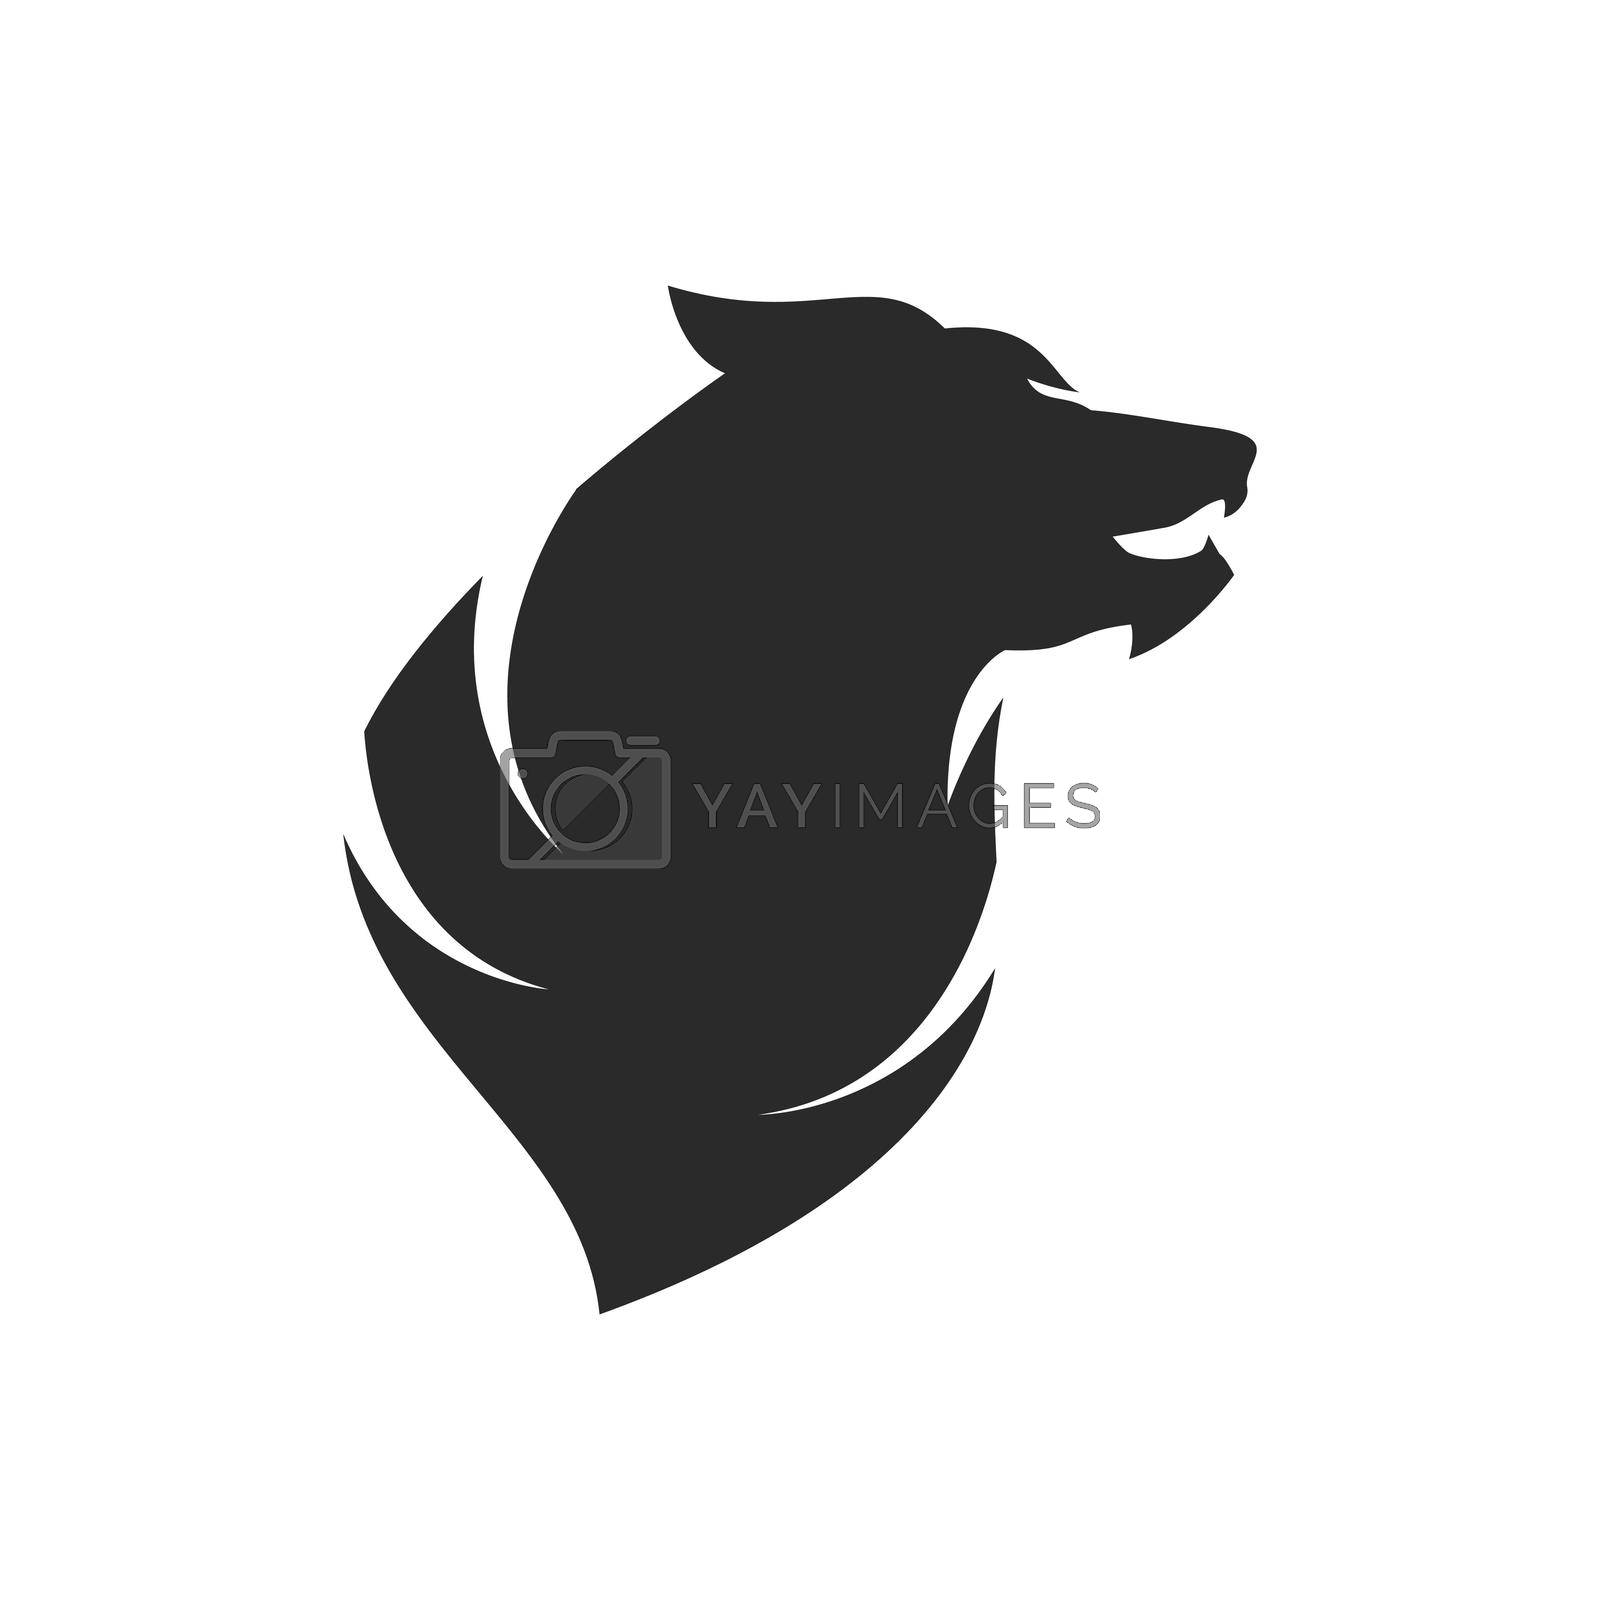 Royalty free image of Lion illustration logo vector by awk